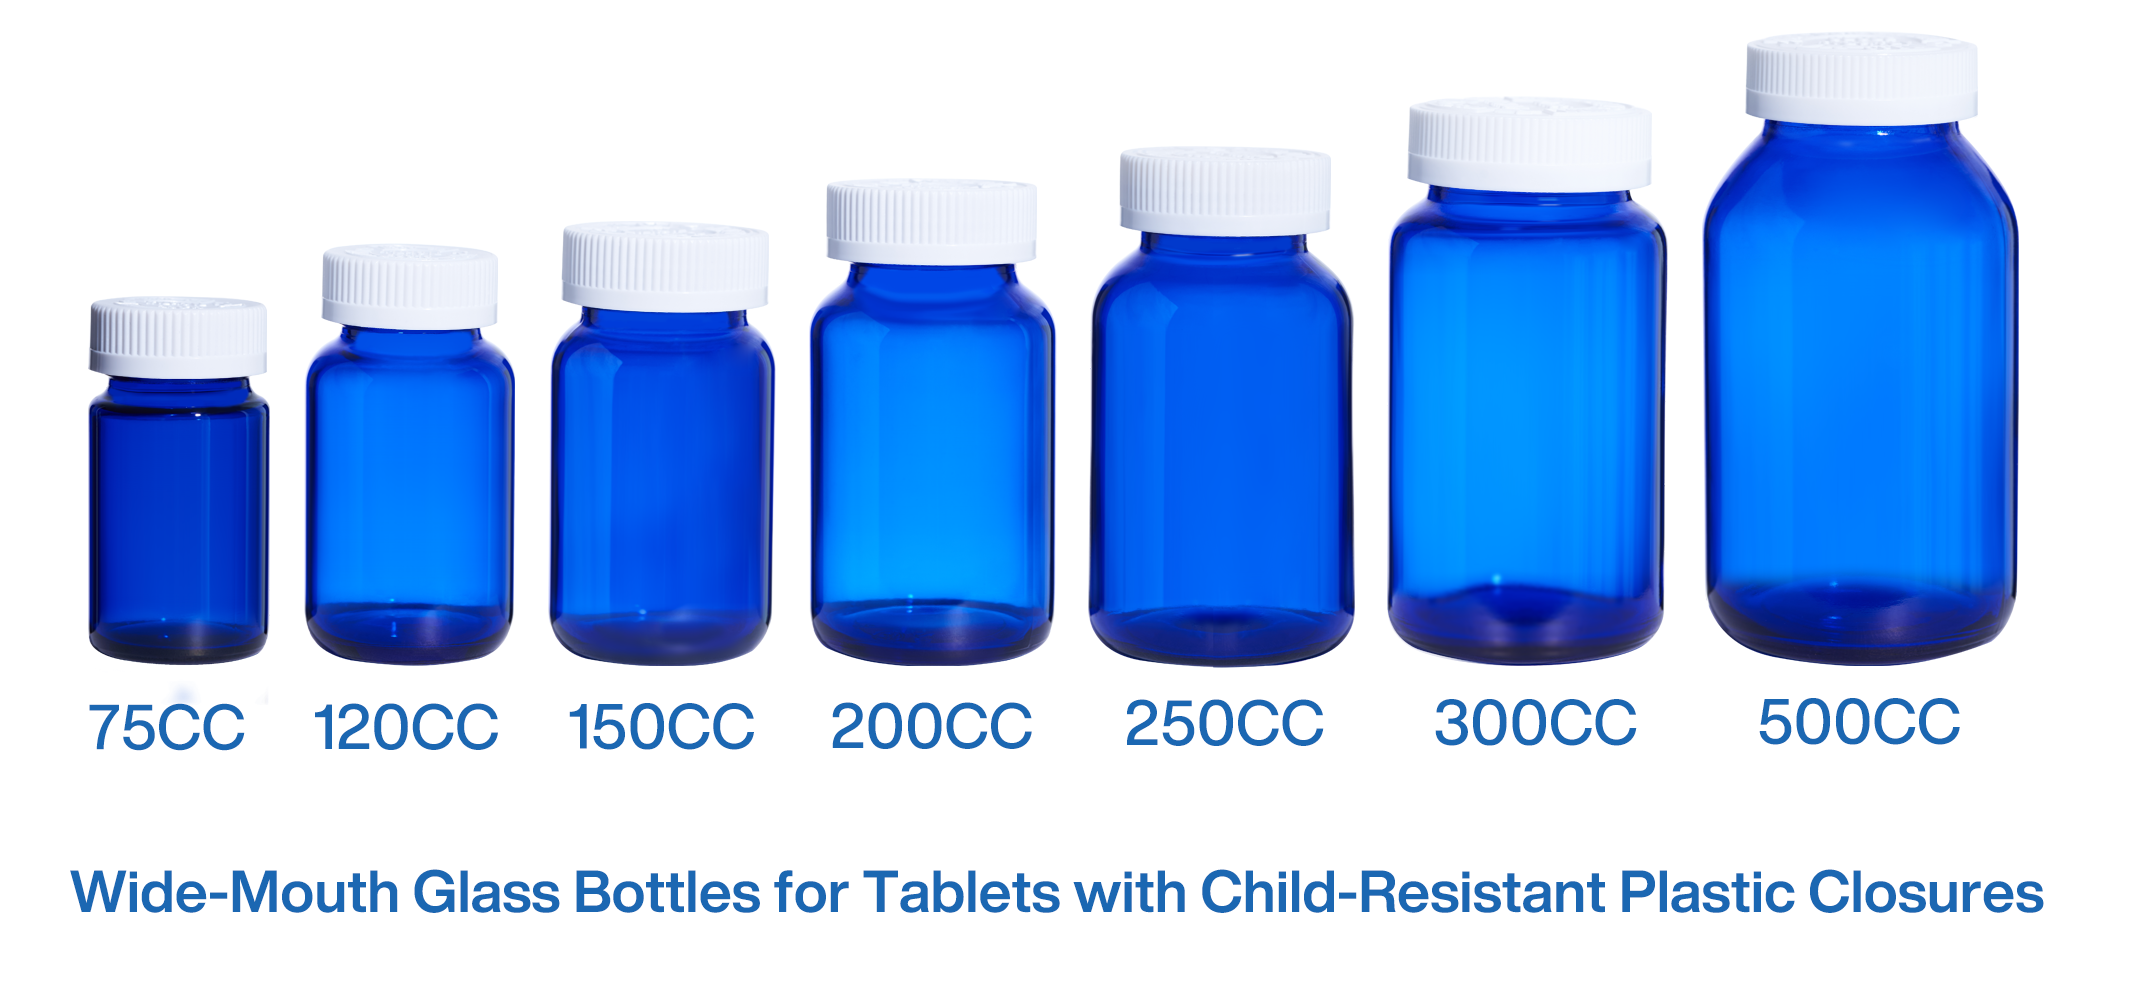 Wide-Mouth Glass Bottles for Tablets with Child-Resistant Plastic Closures.png